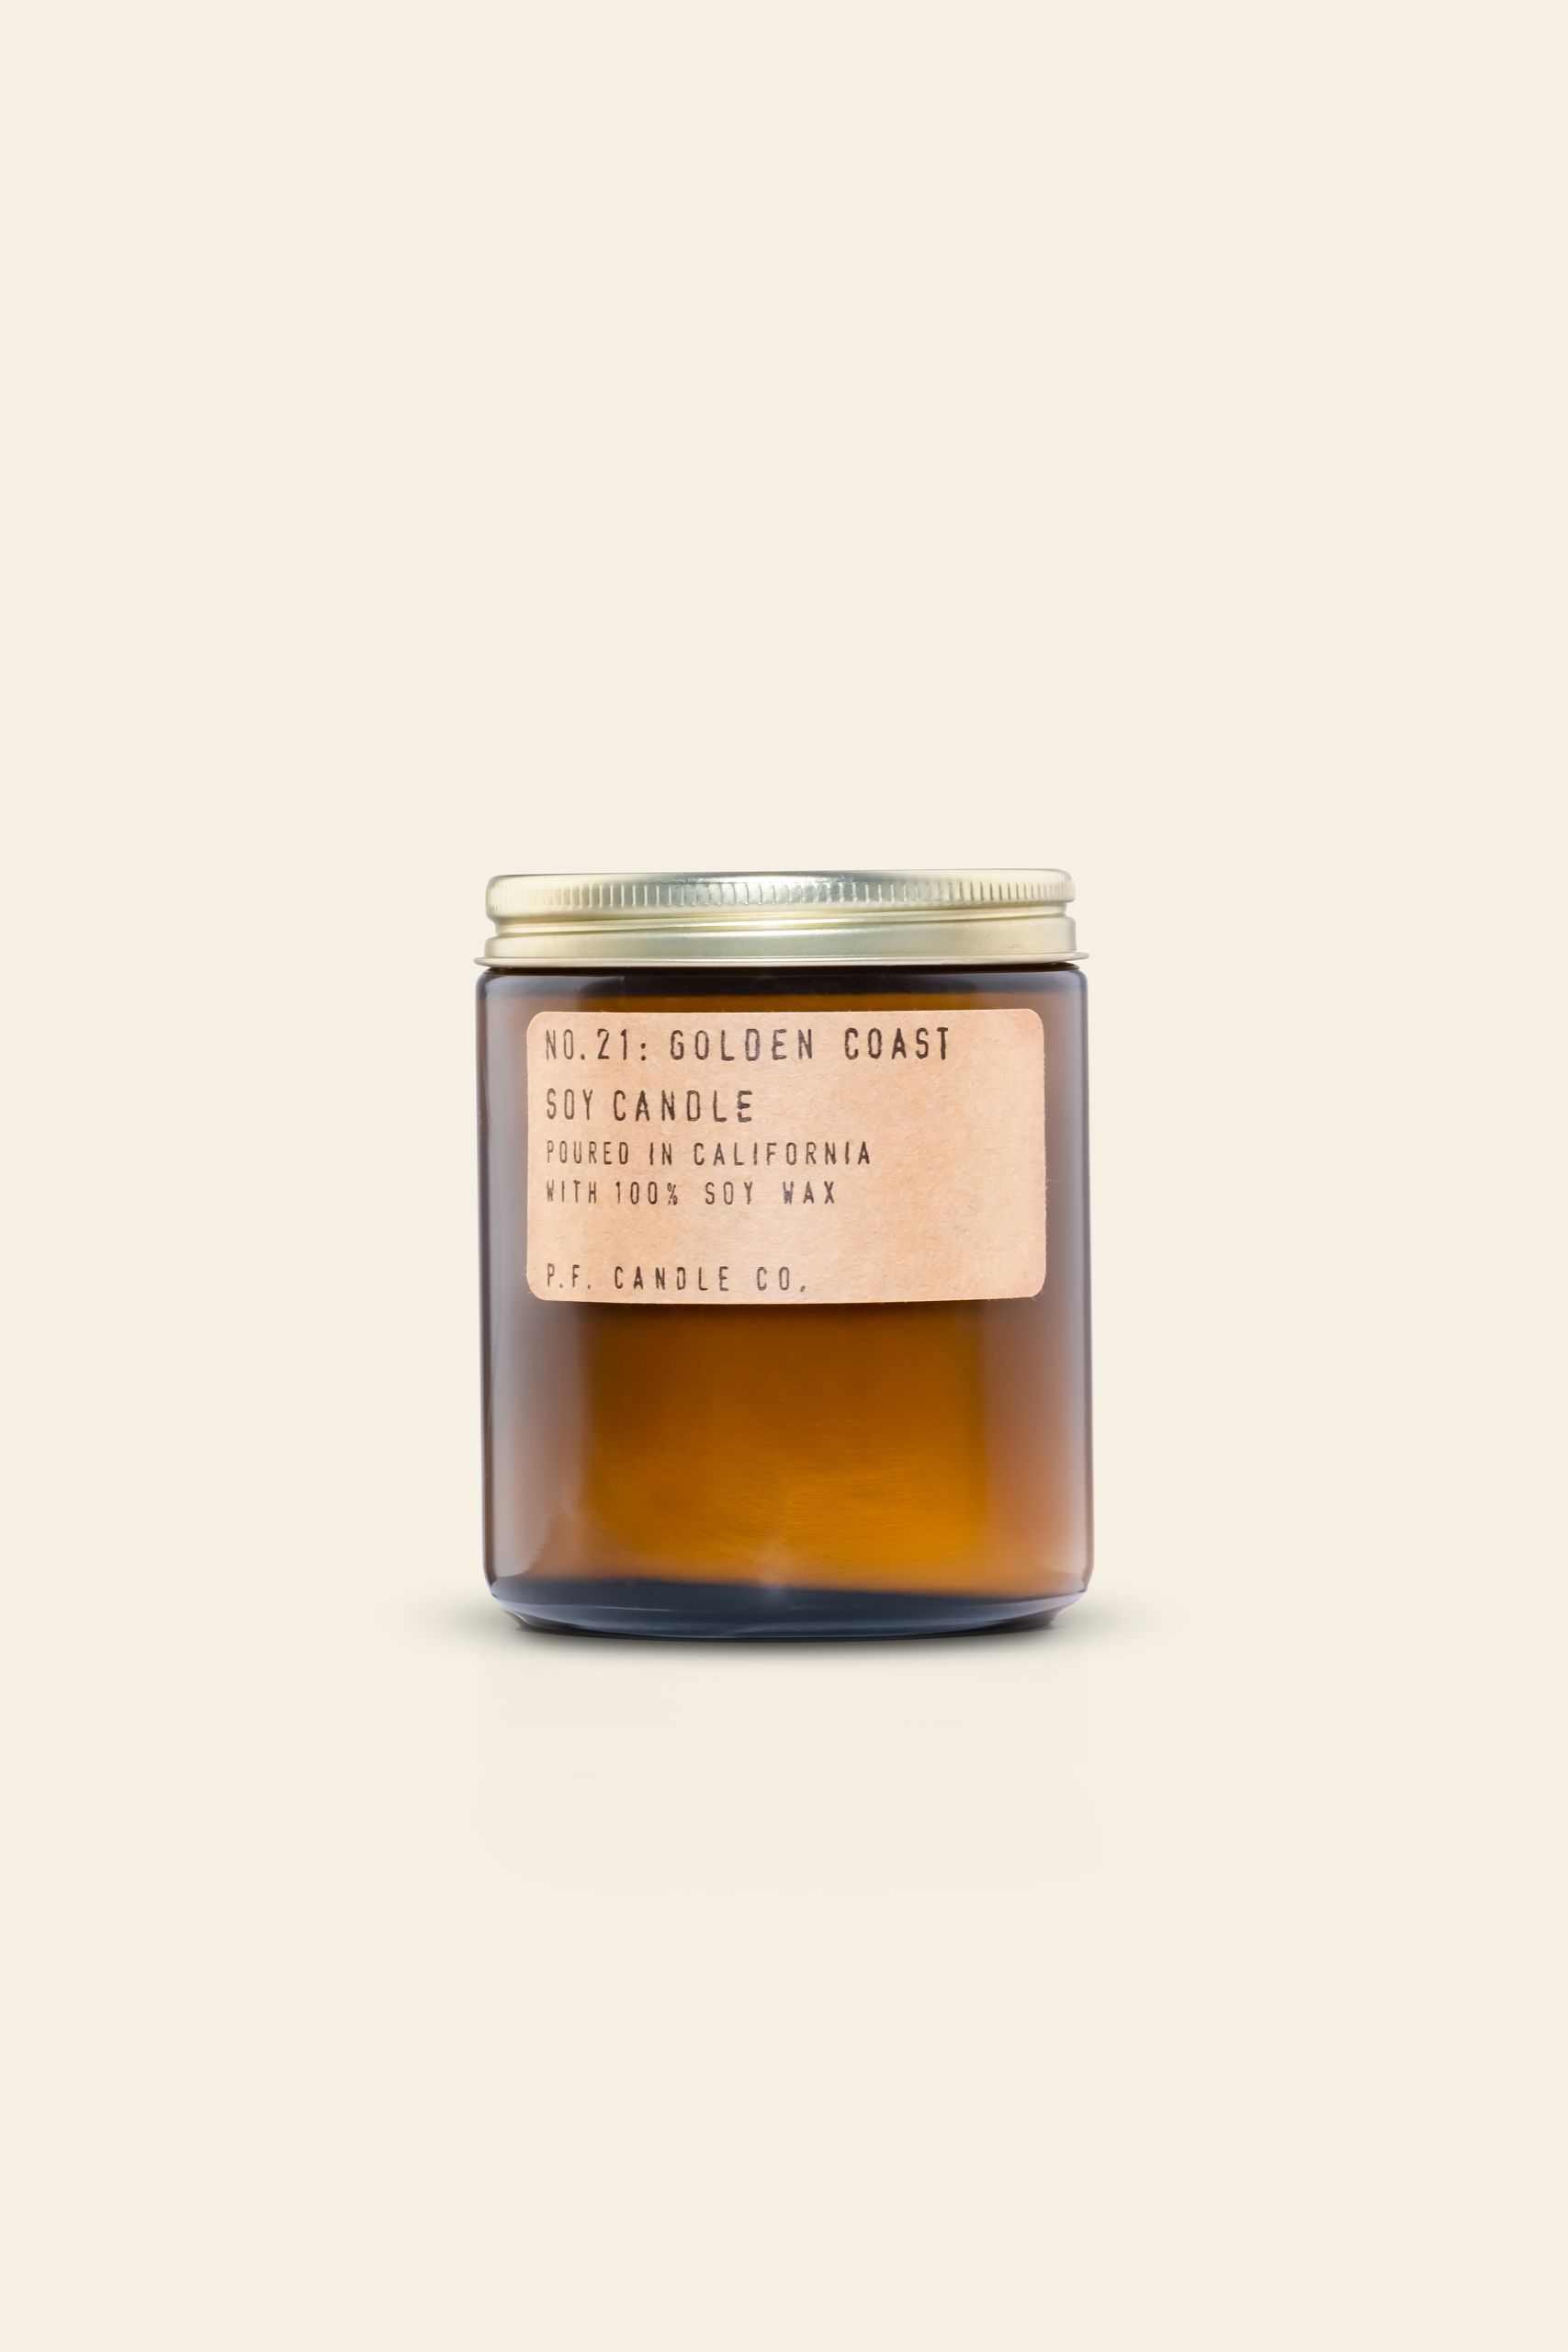 PF Candle Co No 21 Golden Coast 72 oz Soy Candle 1